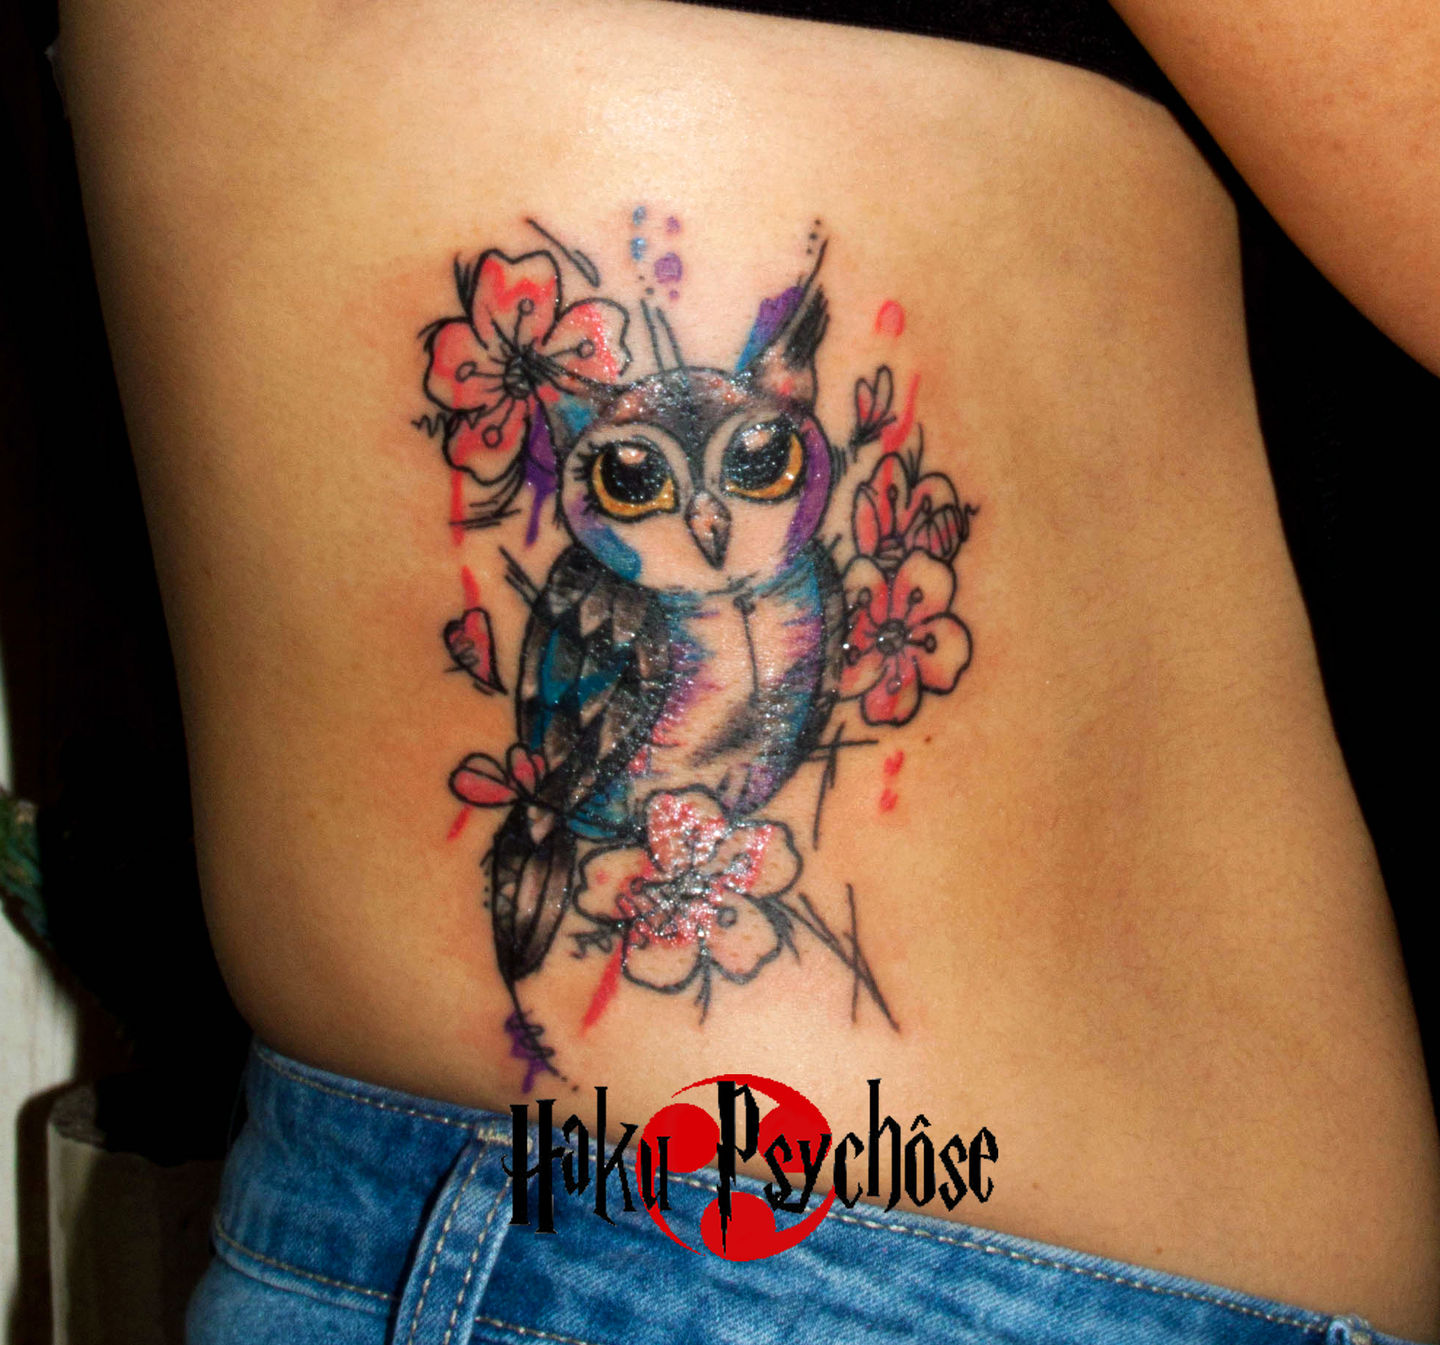 colorful owl tattoo designs for girls